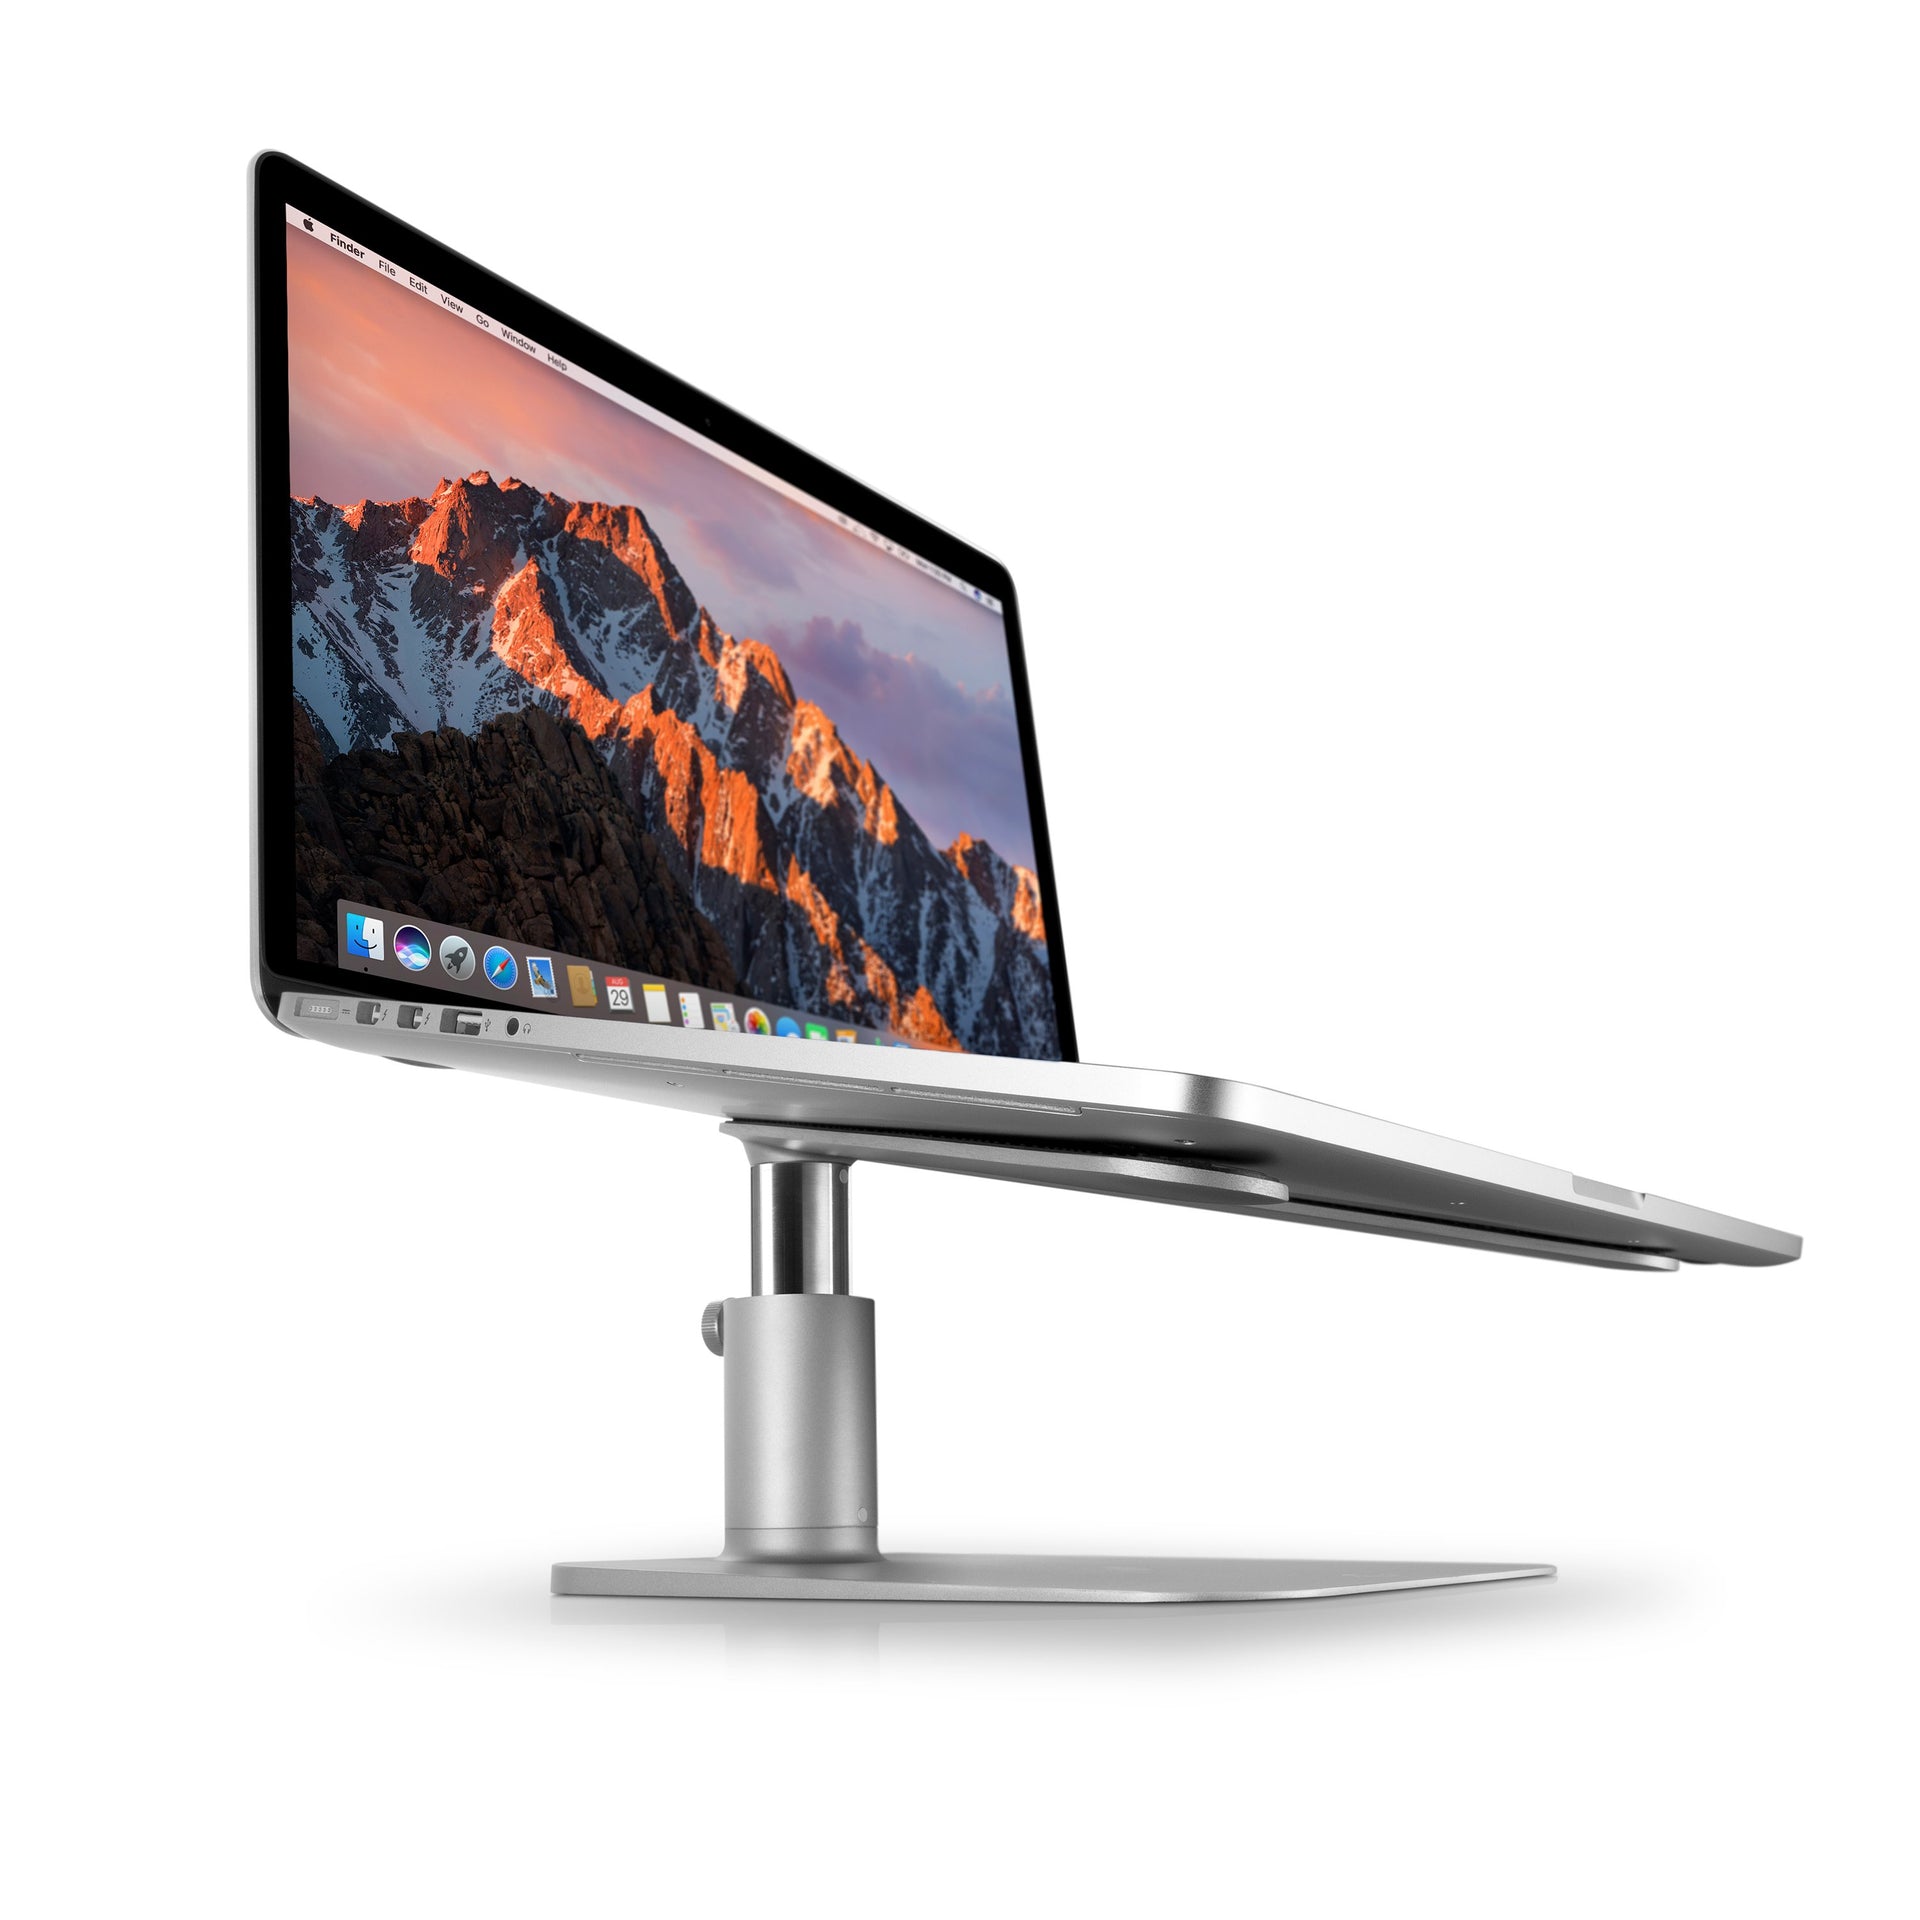  Introducing HiRise for MacBook, the first adjustable stand for MacBooks (and people) of all sizes